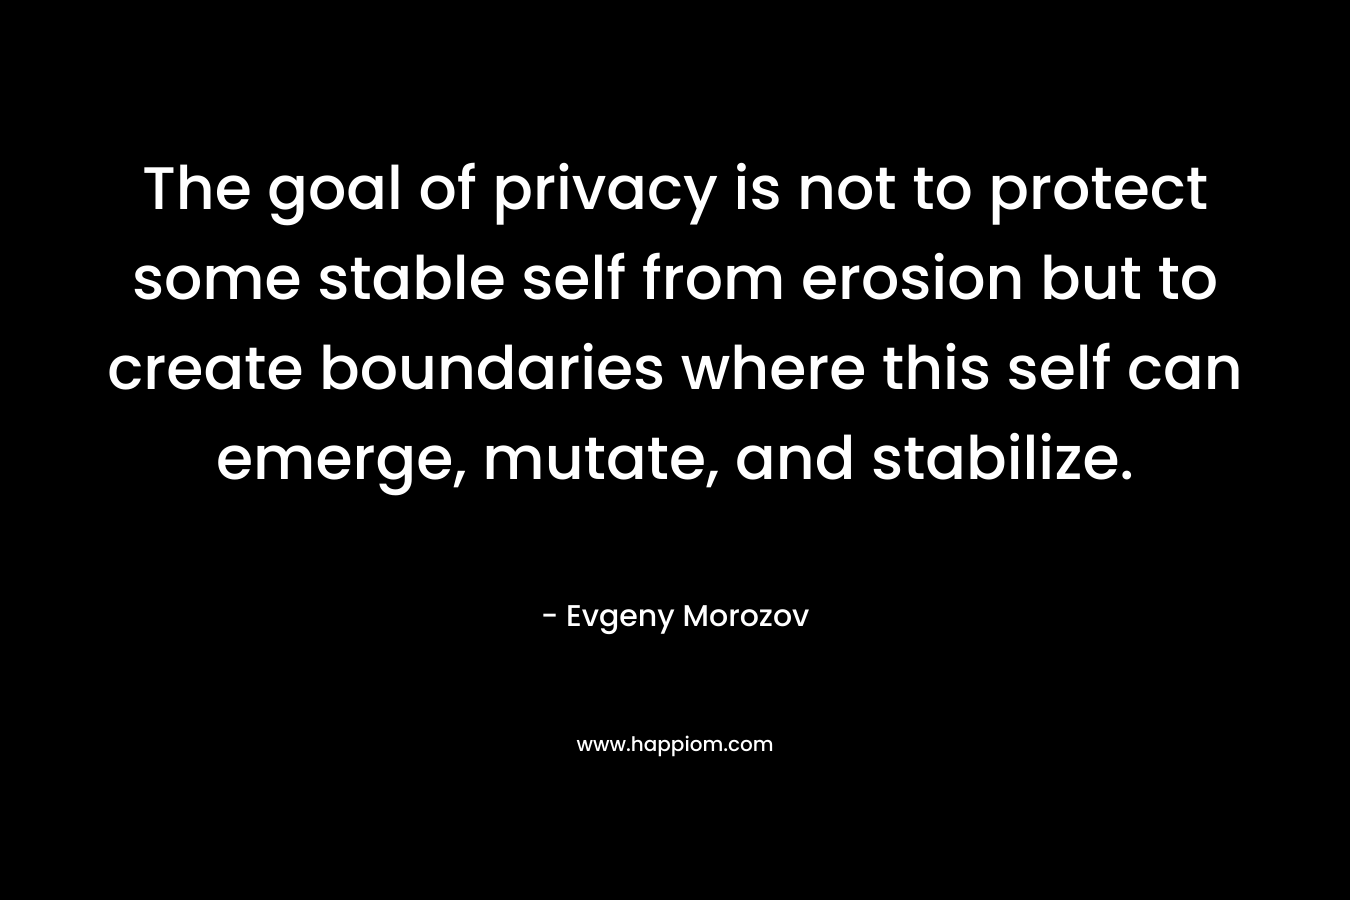 The goal of privacy is not to protect some stable self from erosion but to create boundaries where this self can emerge, mutate, and stabilize. – Evgeny Morozov